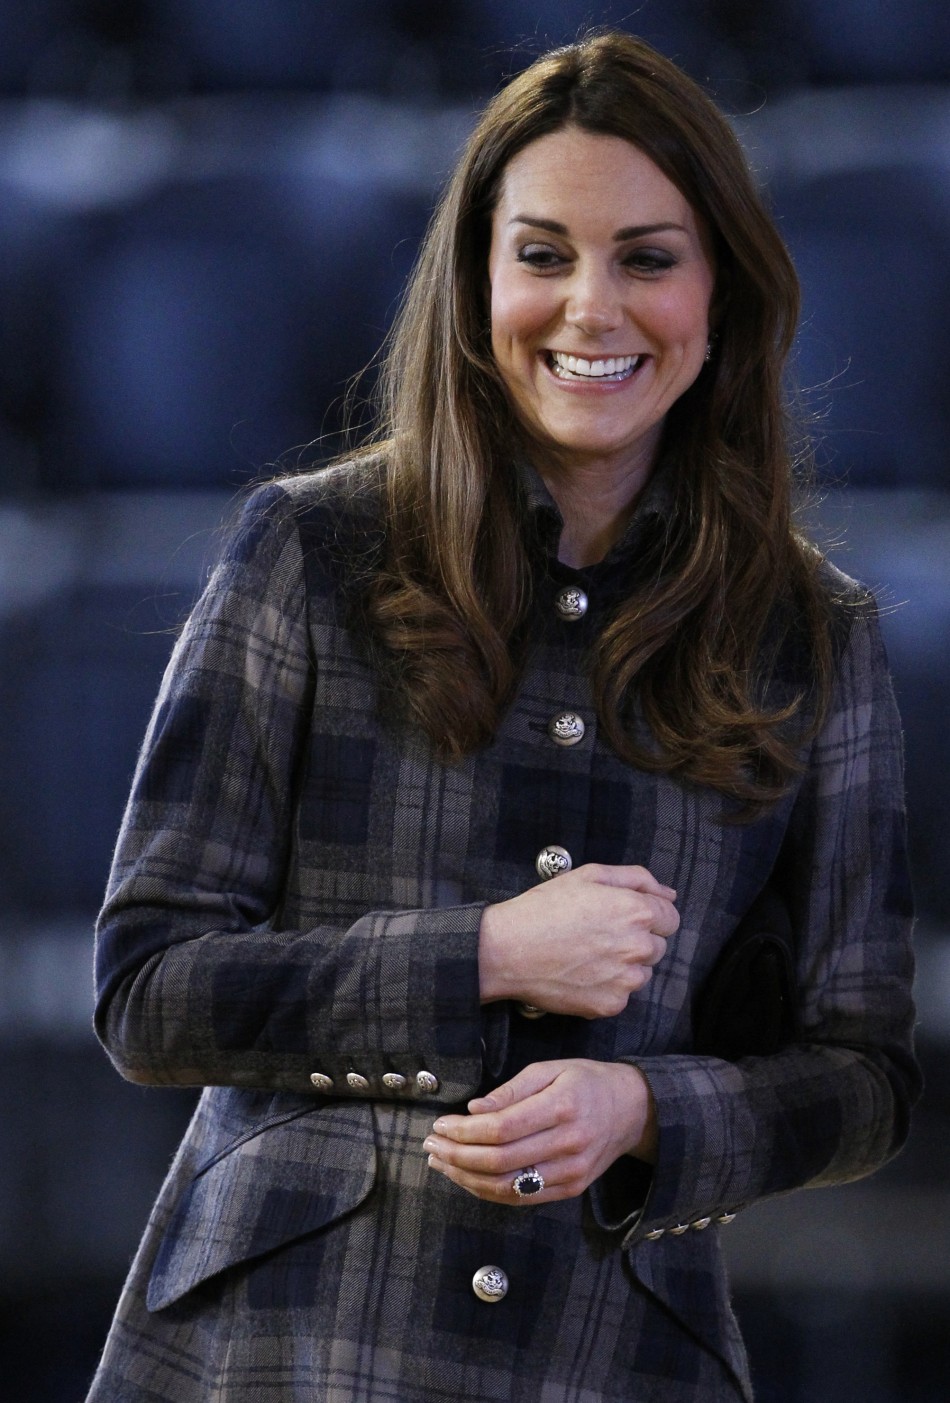 Britains Catherine, Duchess of Cambridge smiles during her visit to the Emirates Arena in Glasgow, Scotland April 4, 2013.